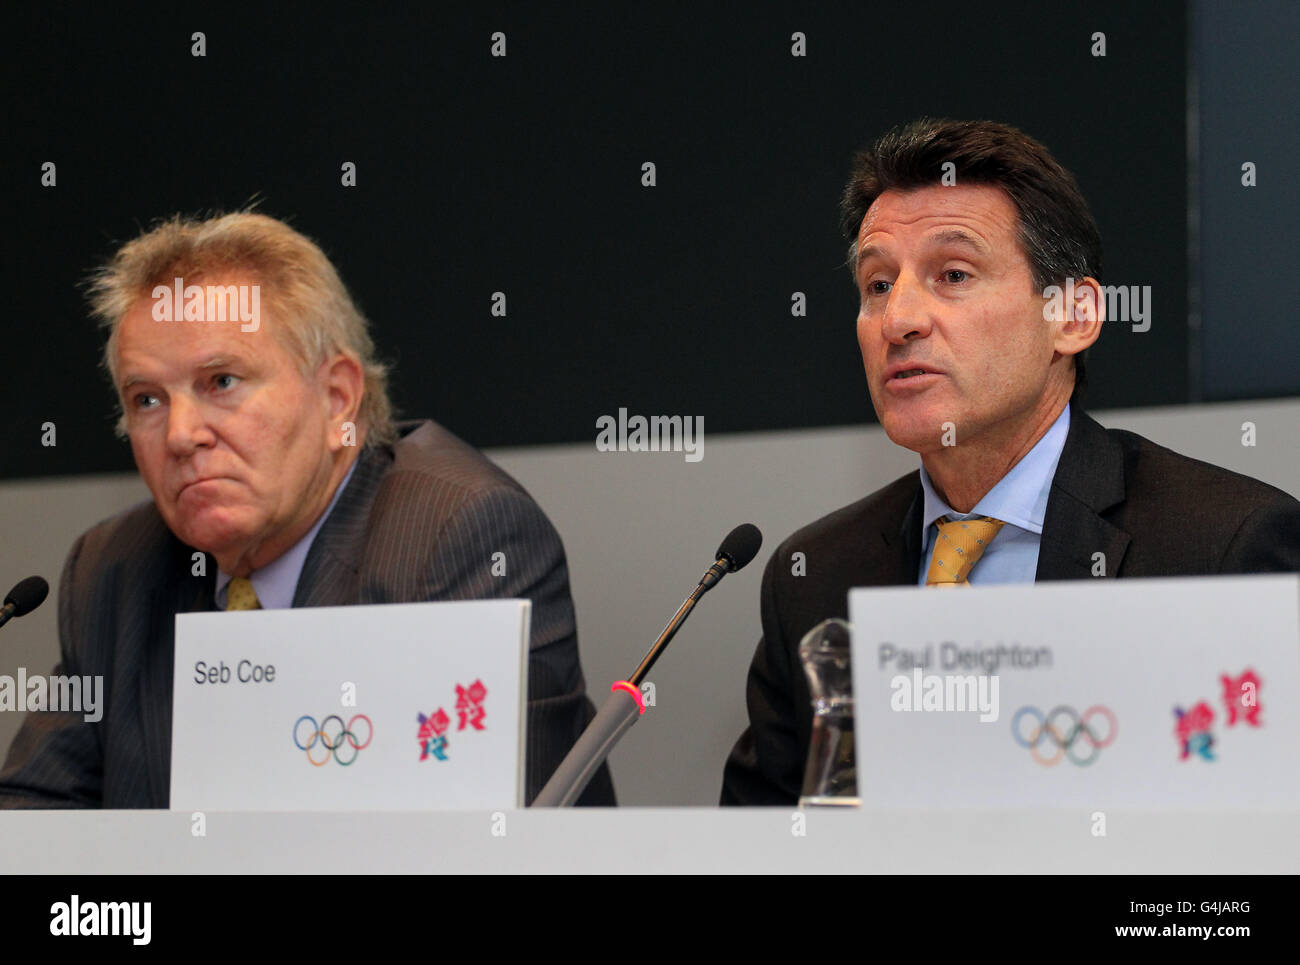 LOCOG Chair Lord Sebastian Coe (right) alongside IOC Coordination Commission Chairman Denis Oswald during the Closing Press Conference from the IOC Coordination Commission at Freshfield Bruckhaus Deringer, London. Stock Photo